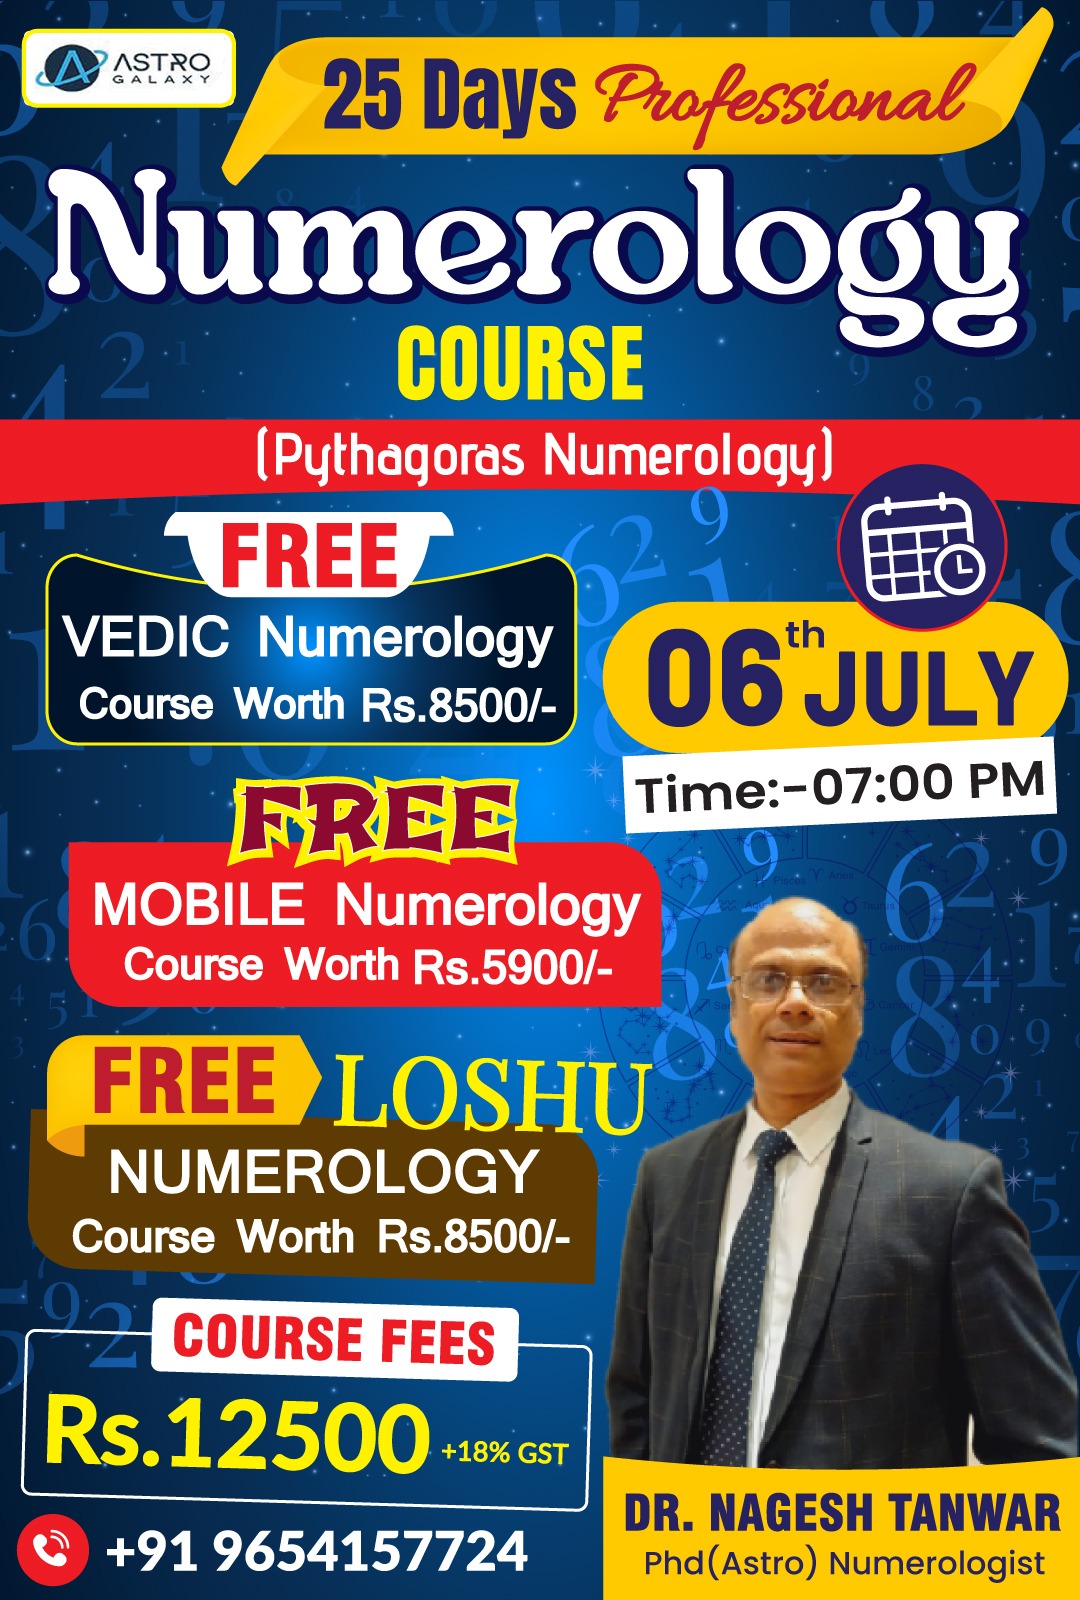 NUMEROLOGY GROUP 19